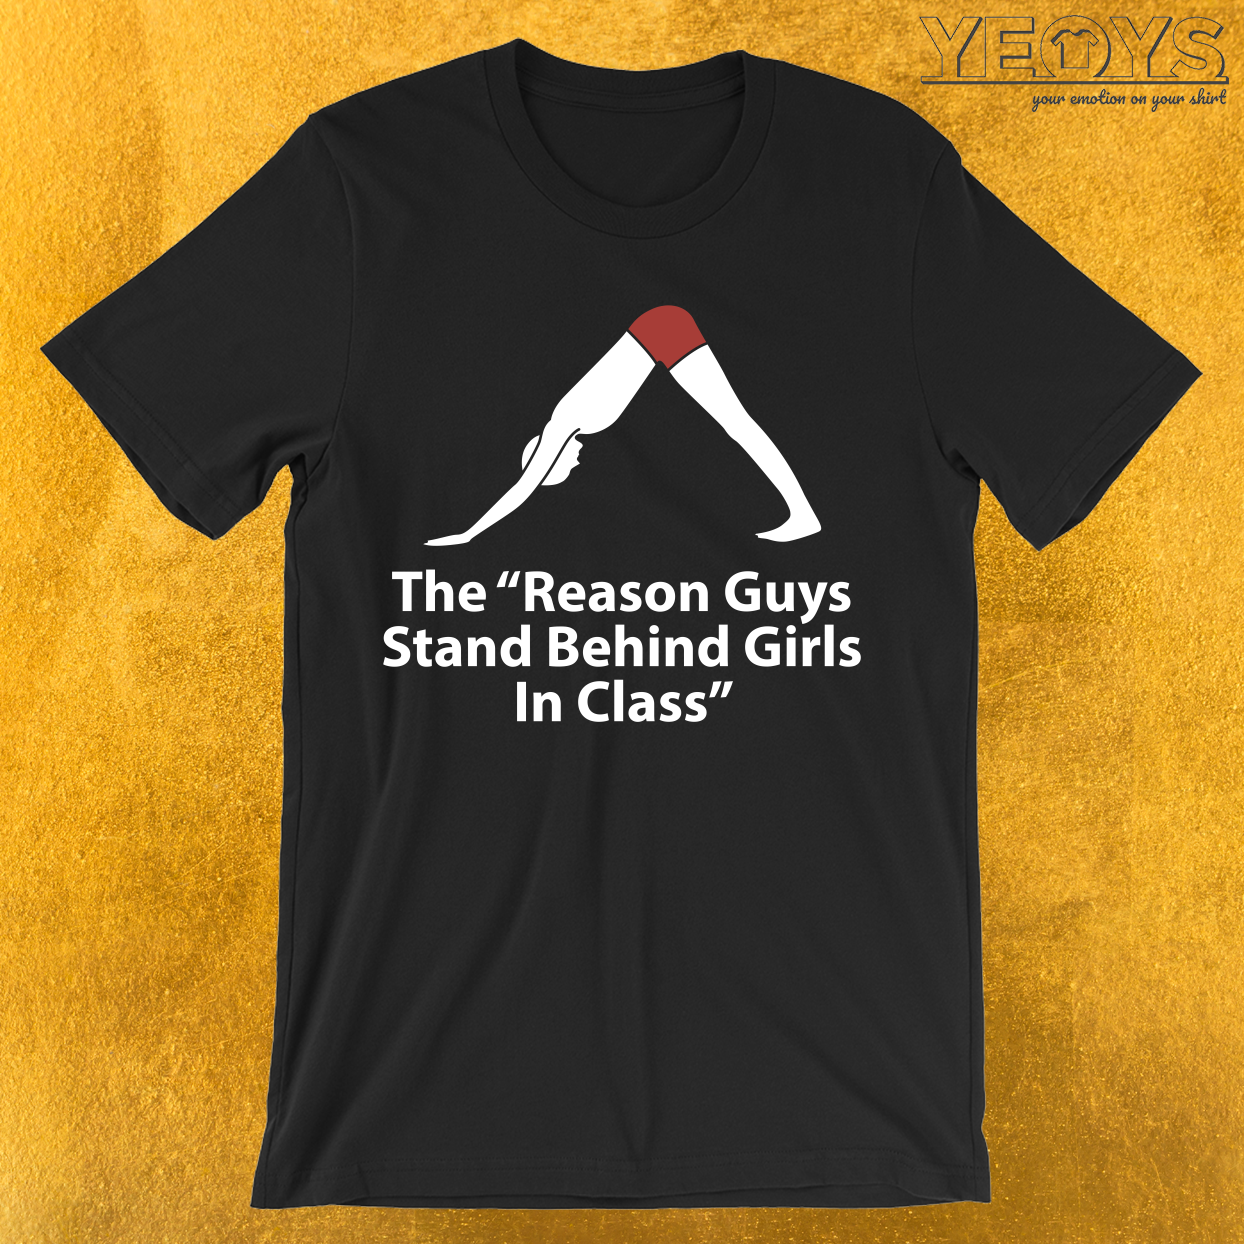 The ‘Reason Guys Stand Behind Girls In Class’ T-Shirt